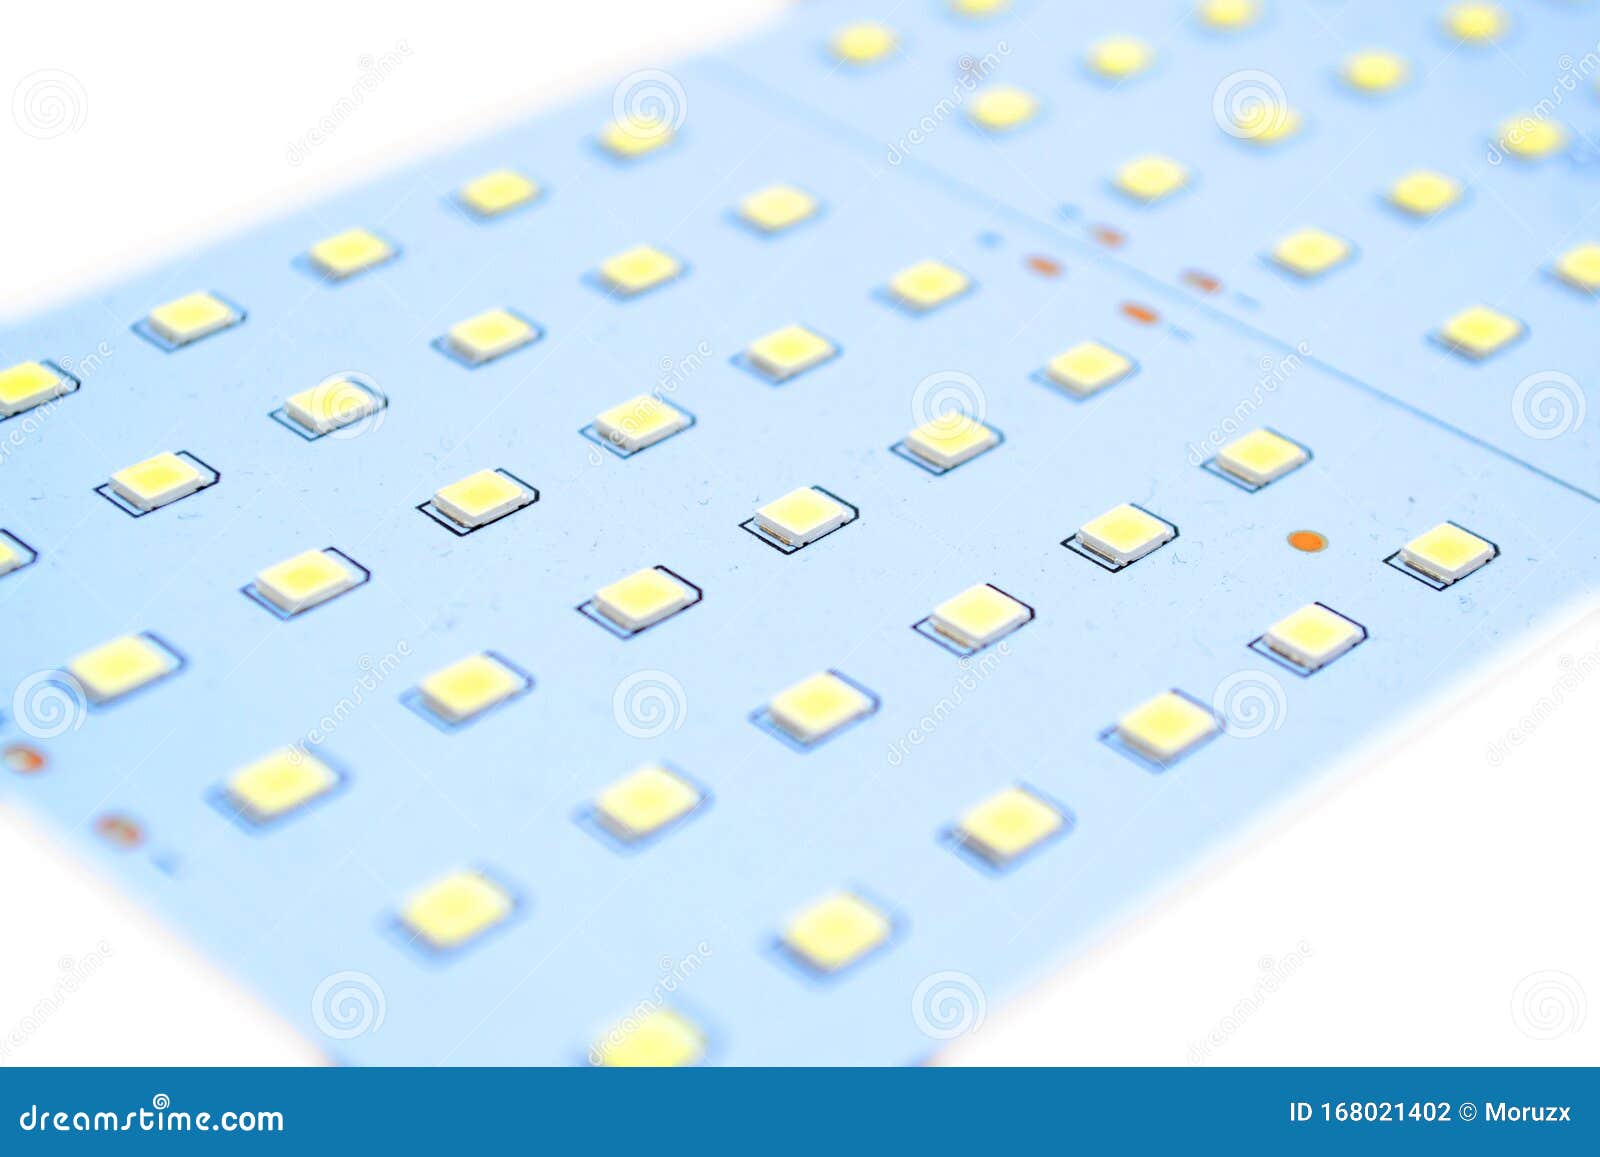 led electronic board. stock photo. Image of electricitate - 168021402